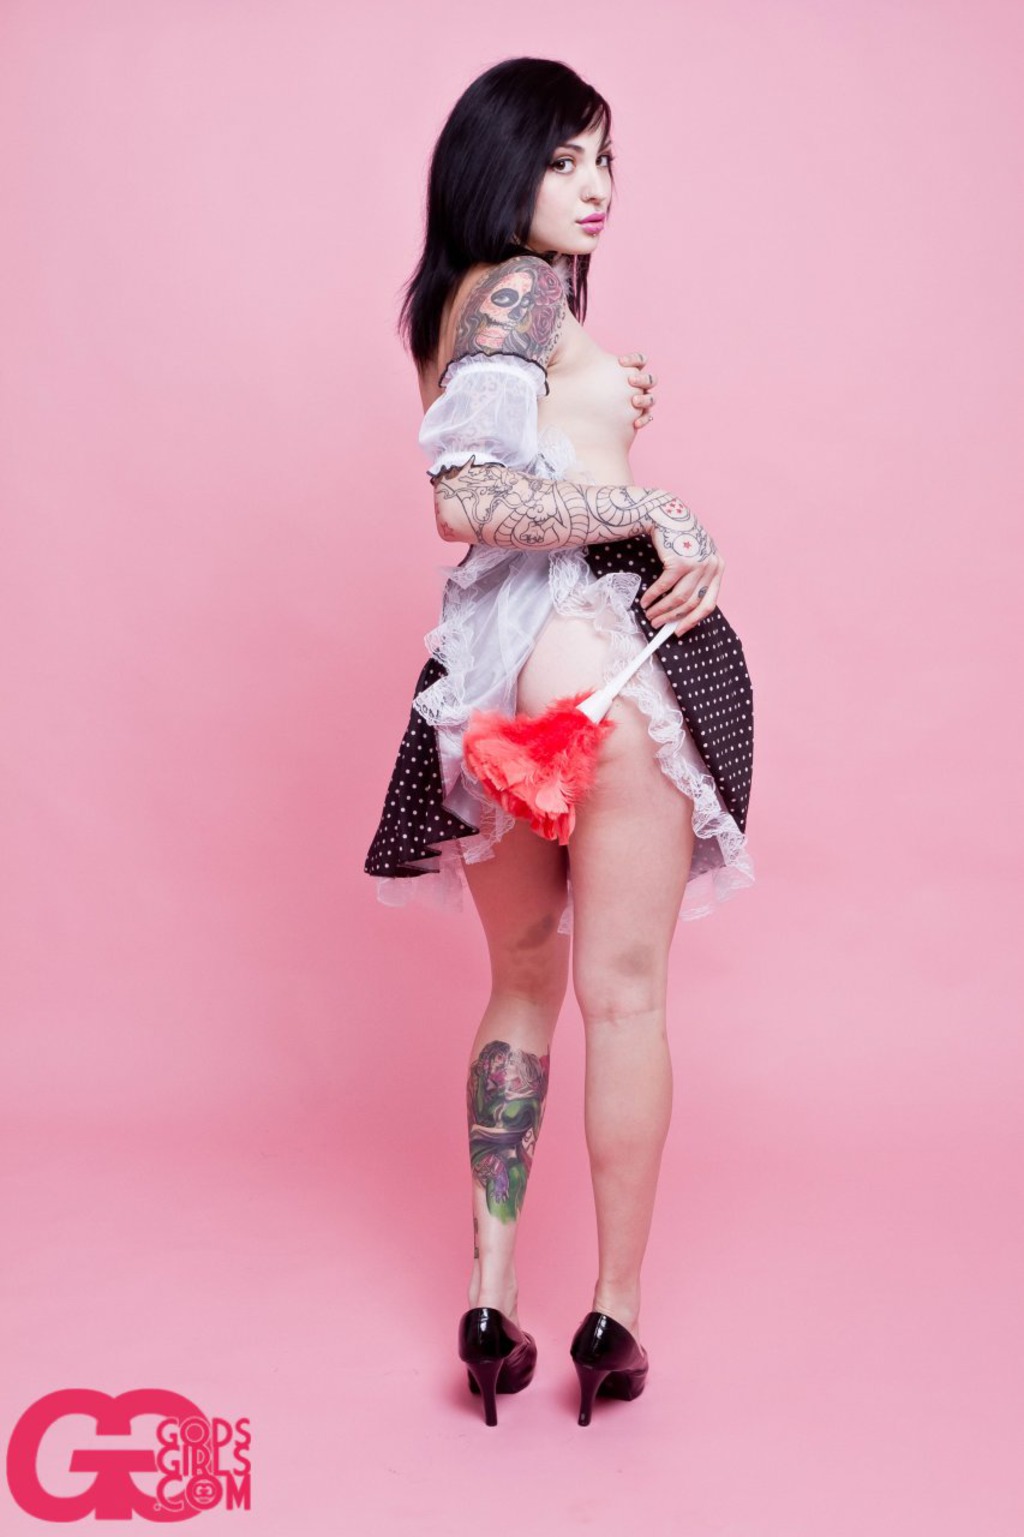 Tattooed Girl In Pink Room 10